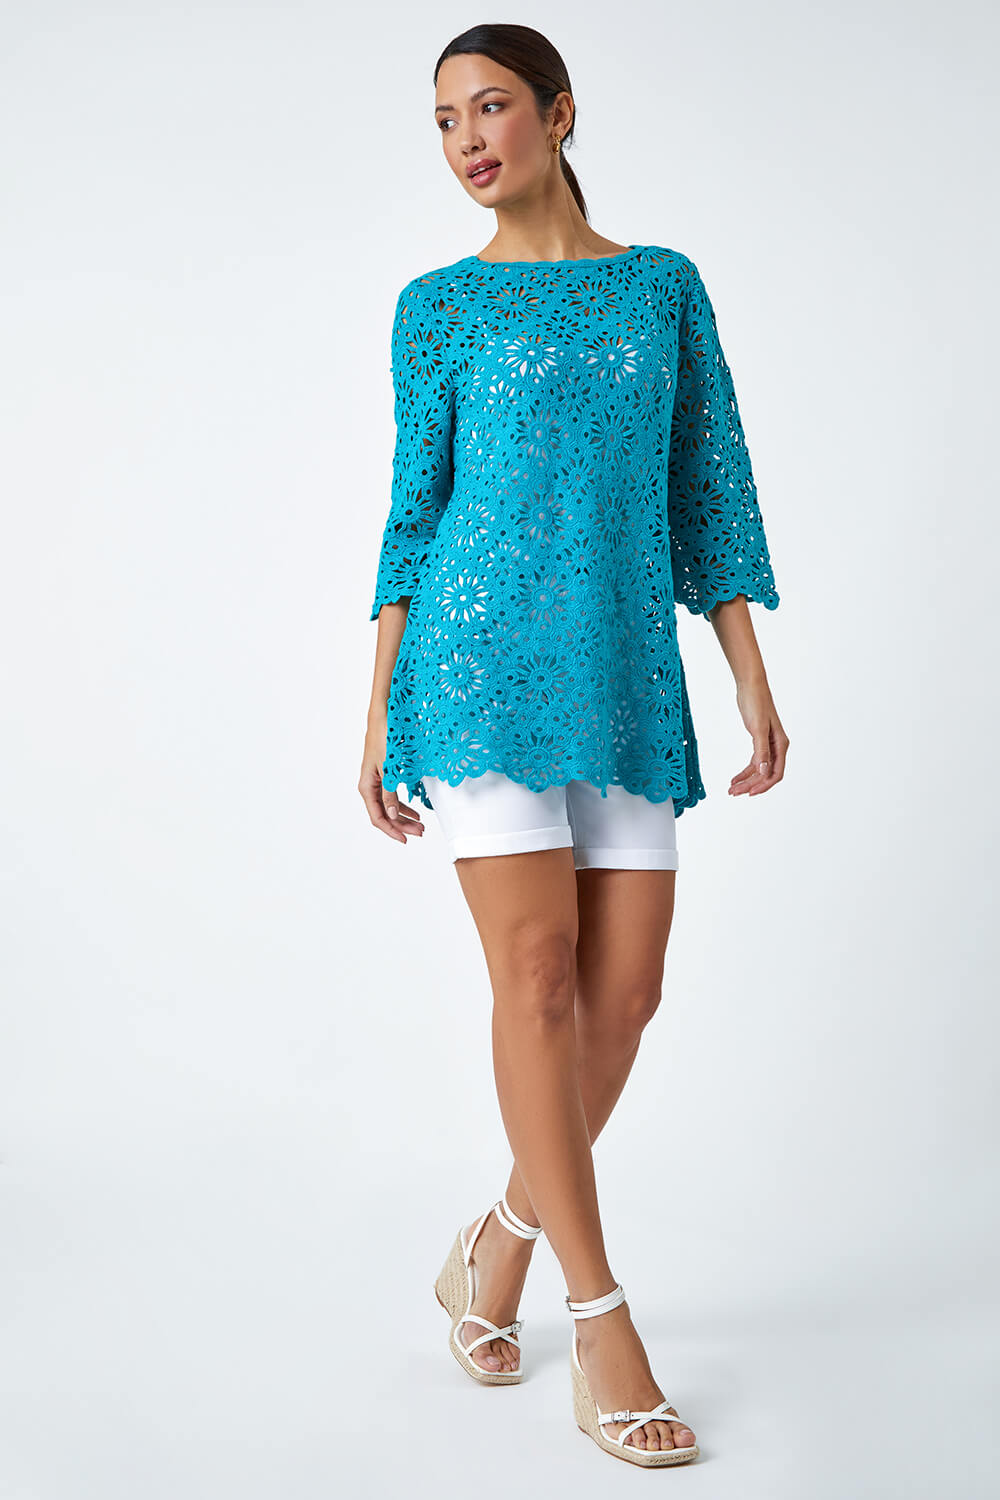 Turquoise Floral Cotton Crochet Top, Image 2 of 5